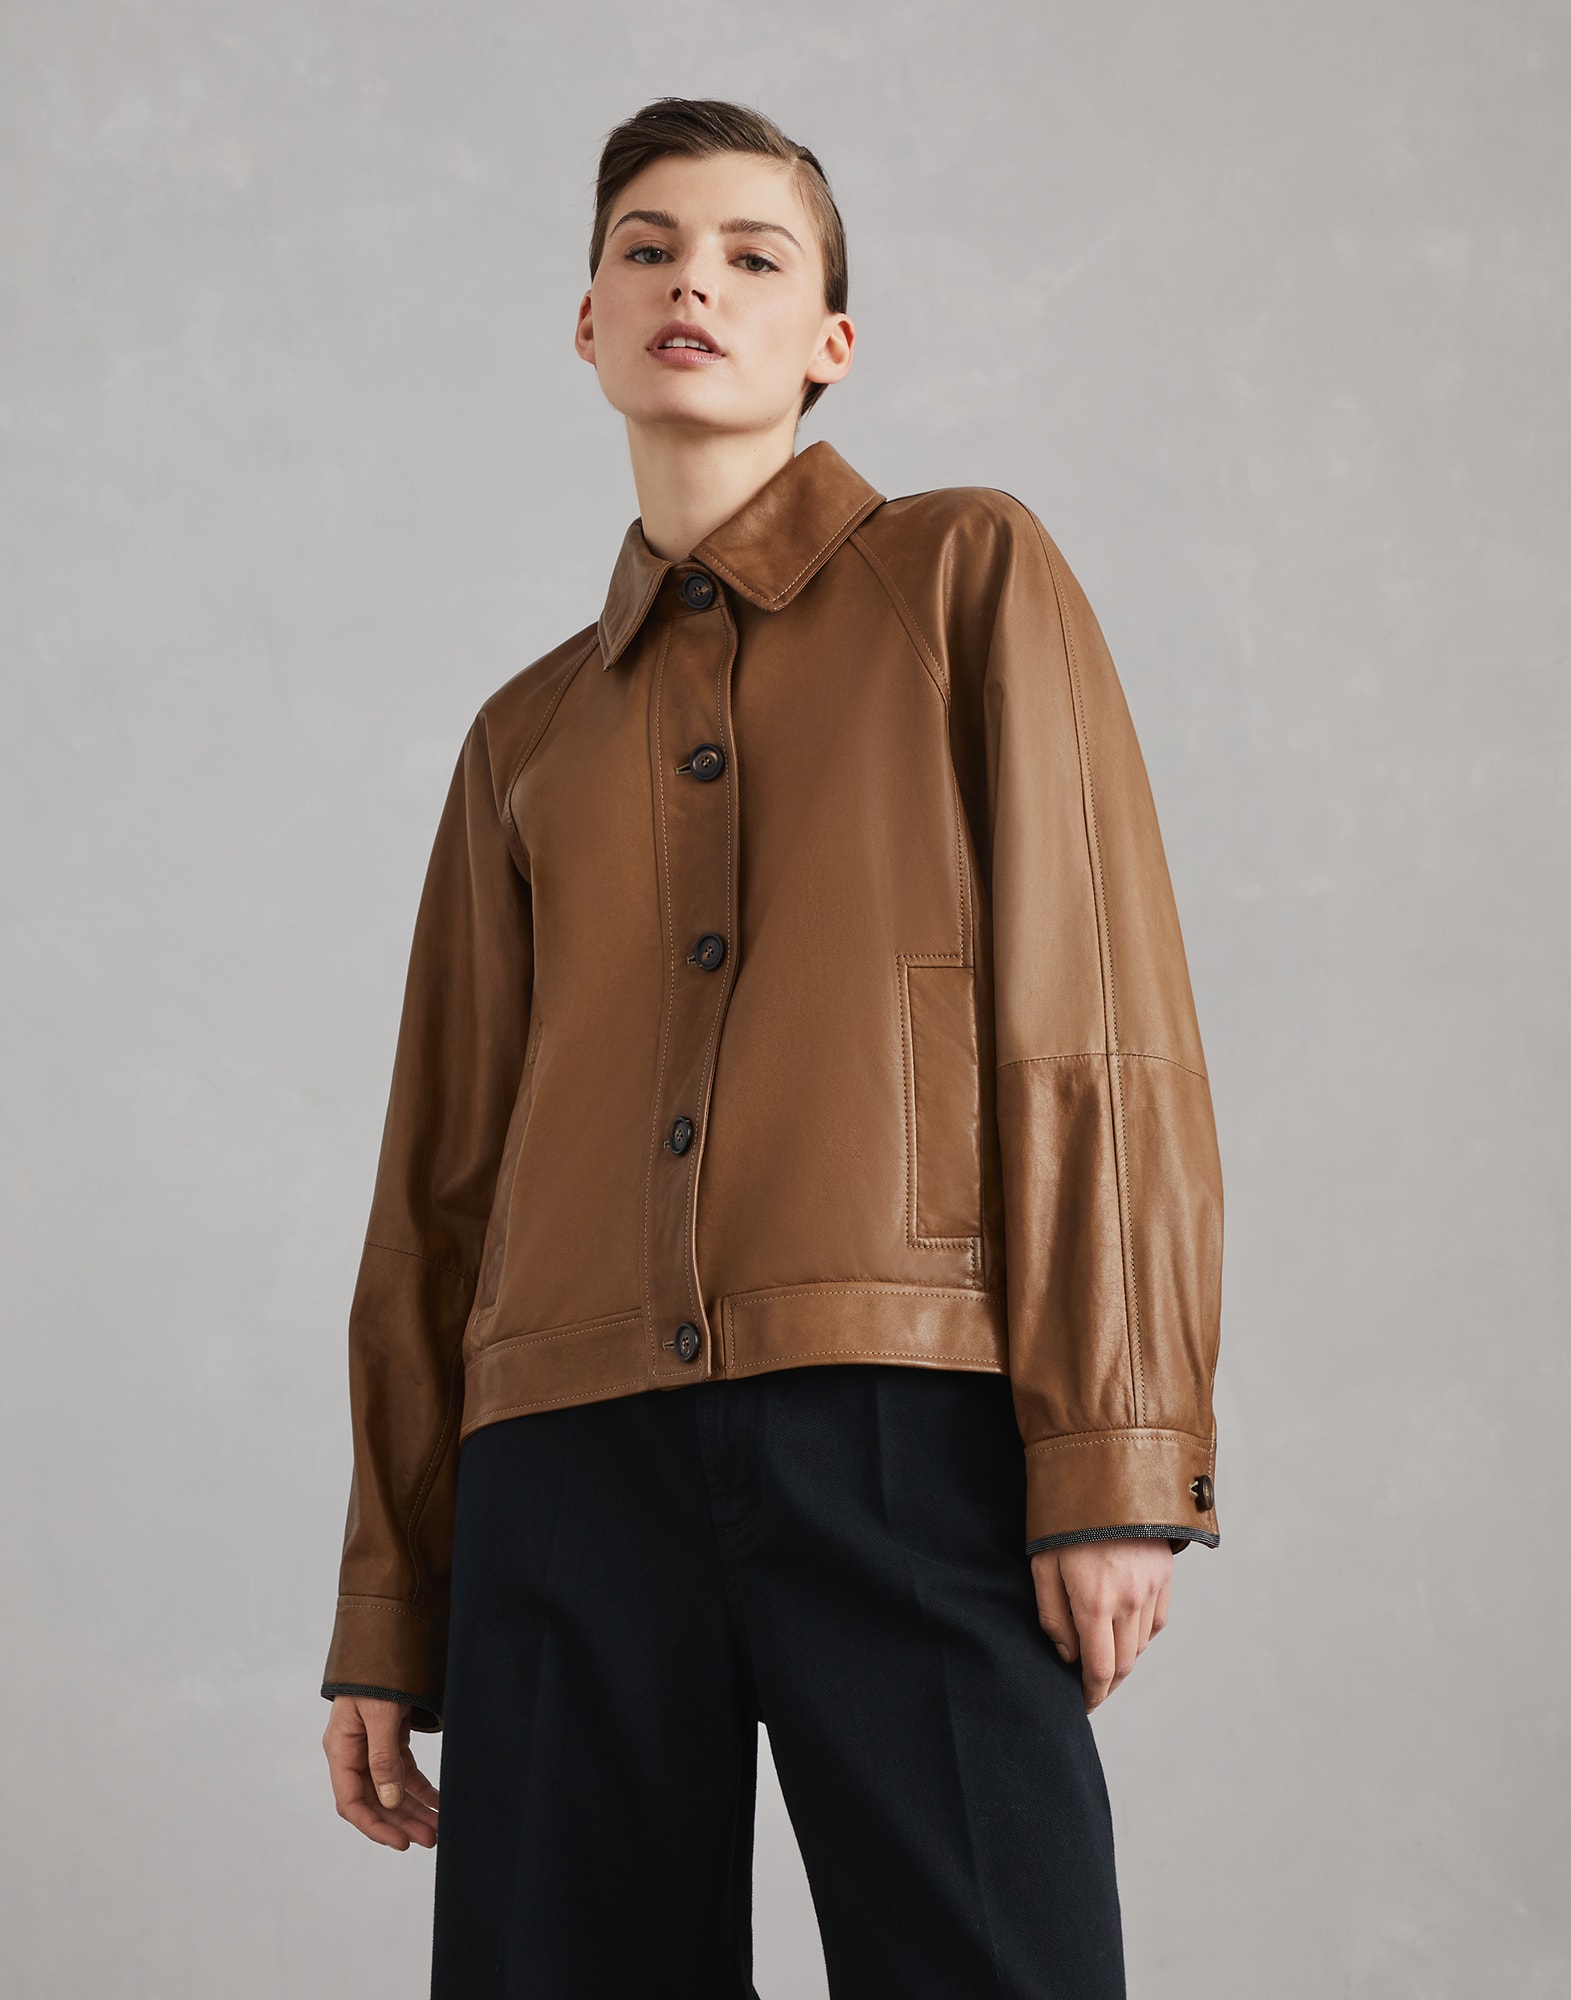 Nappa leather outerwear